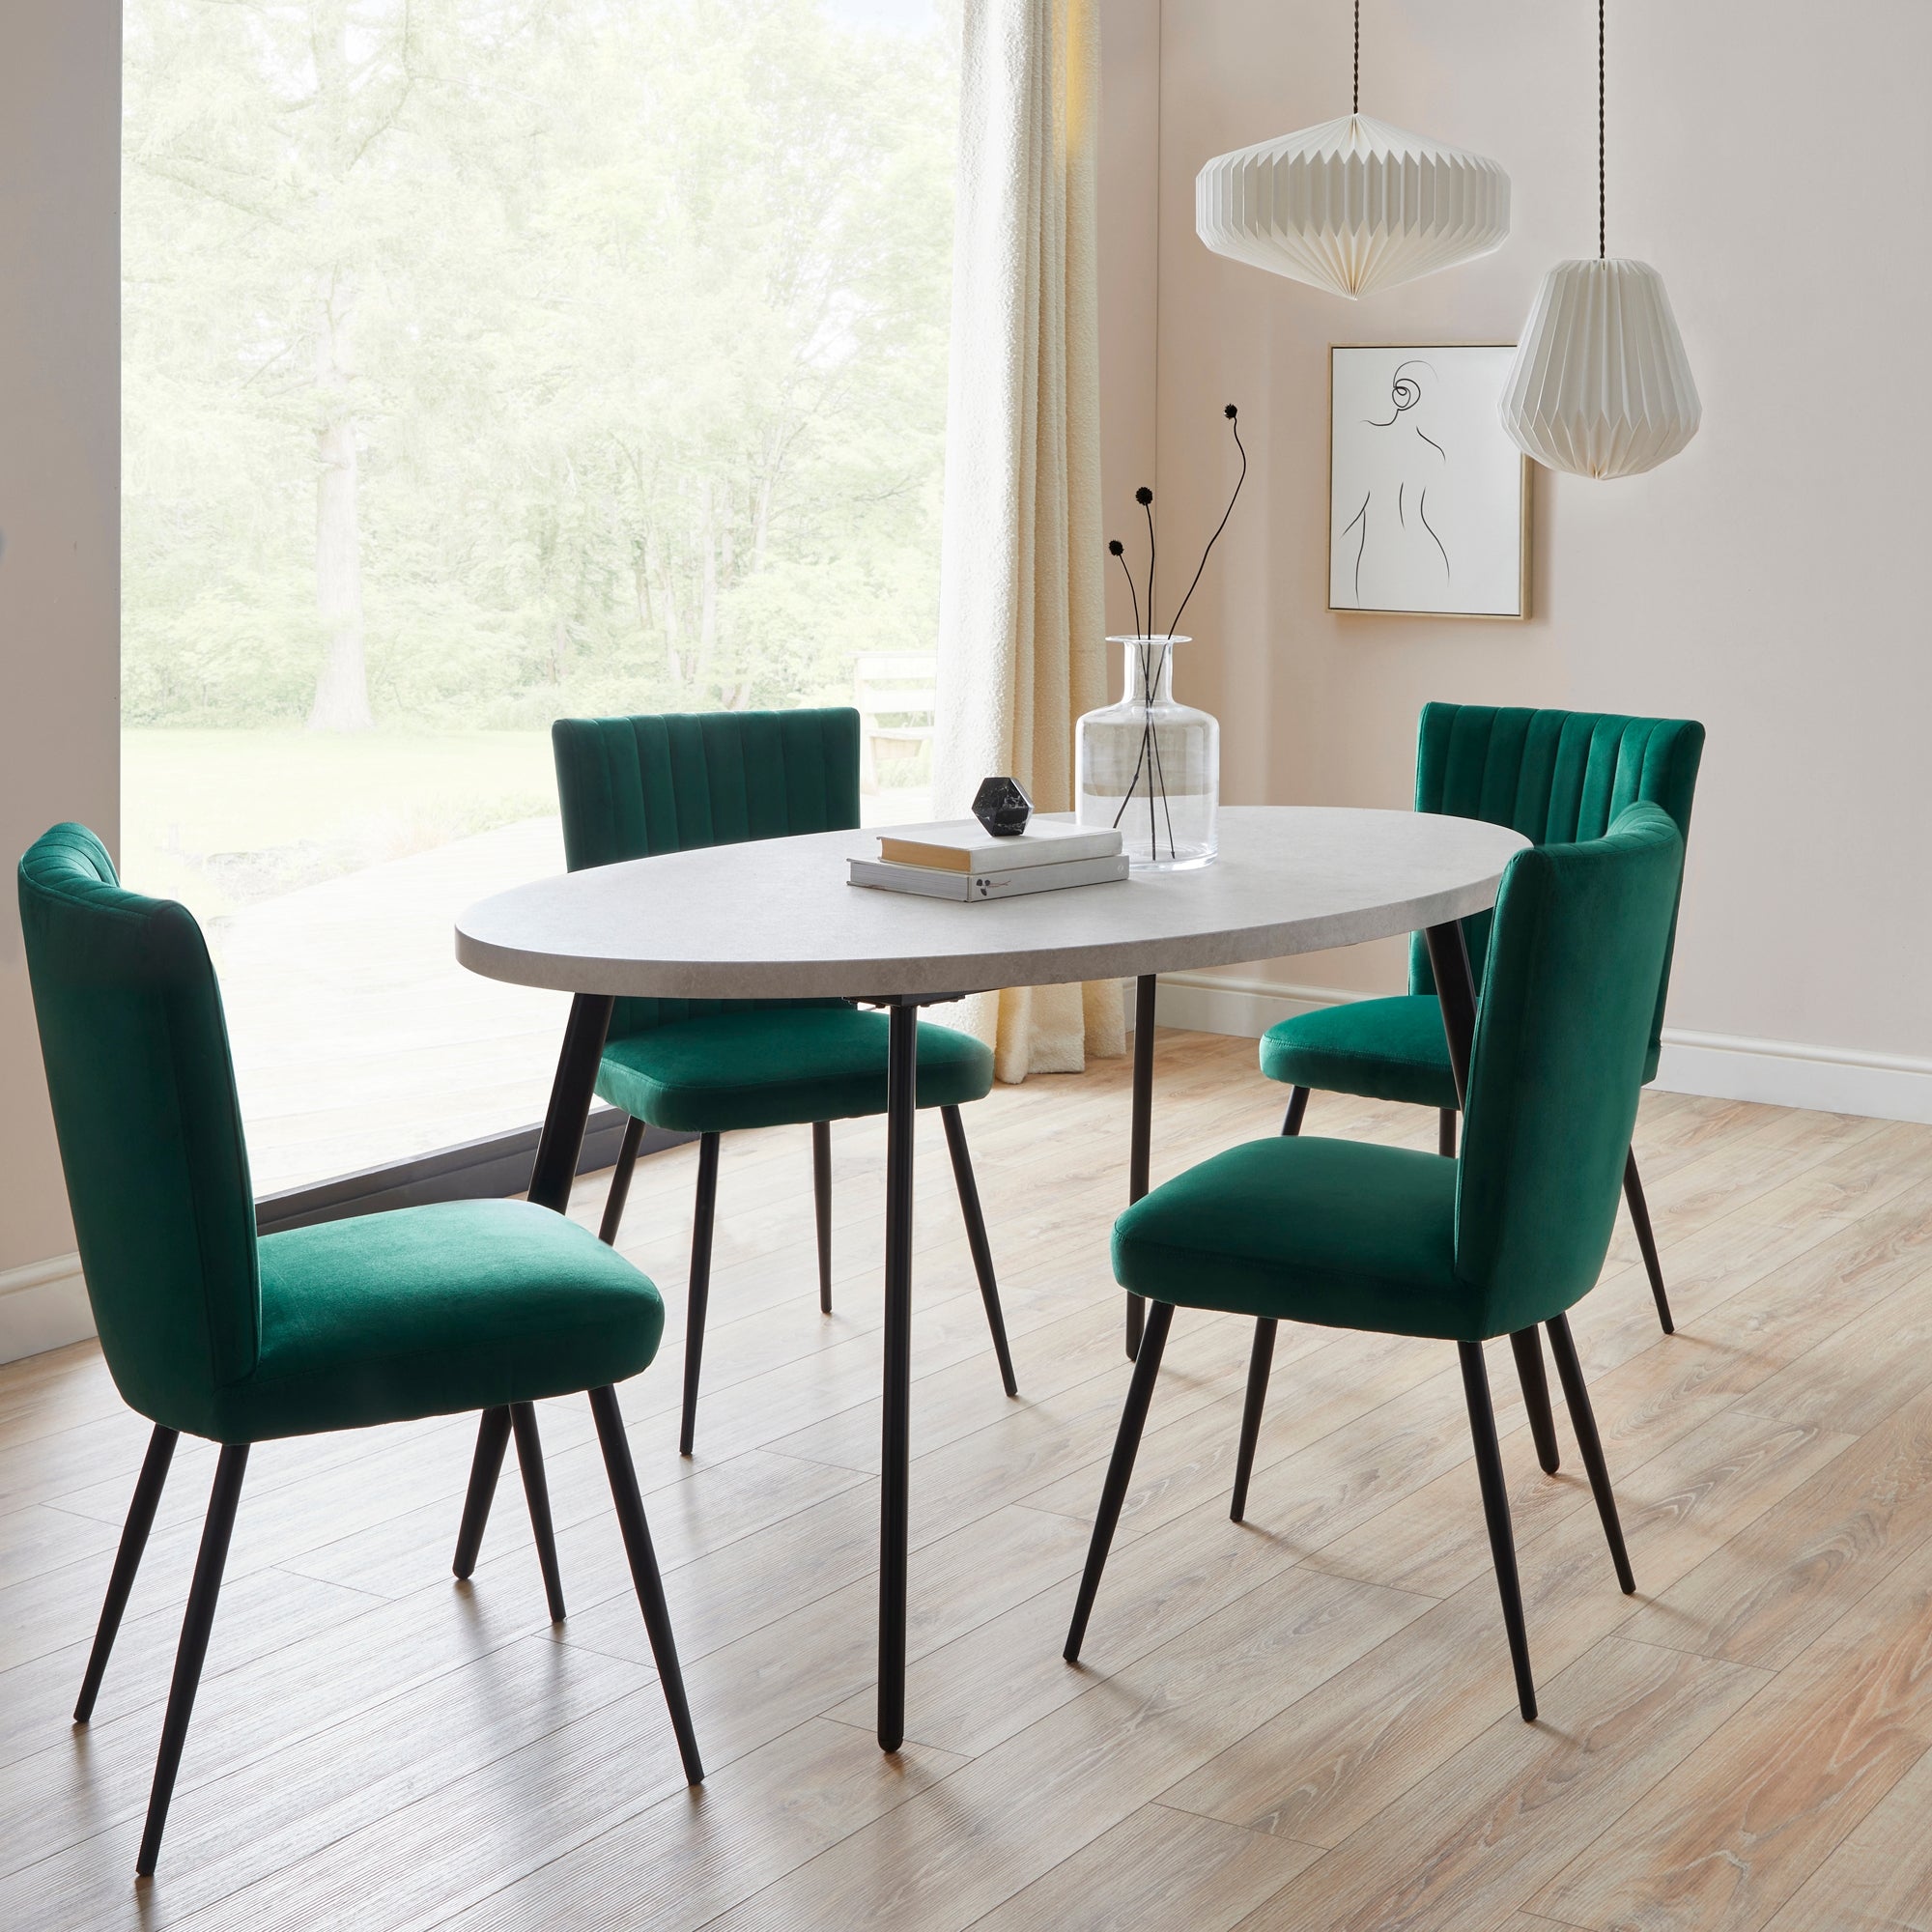 Zuri Dining Table with 4 Taylor Chairs Green